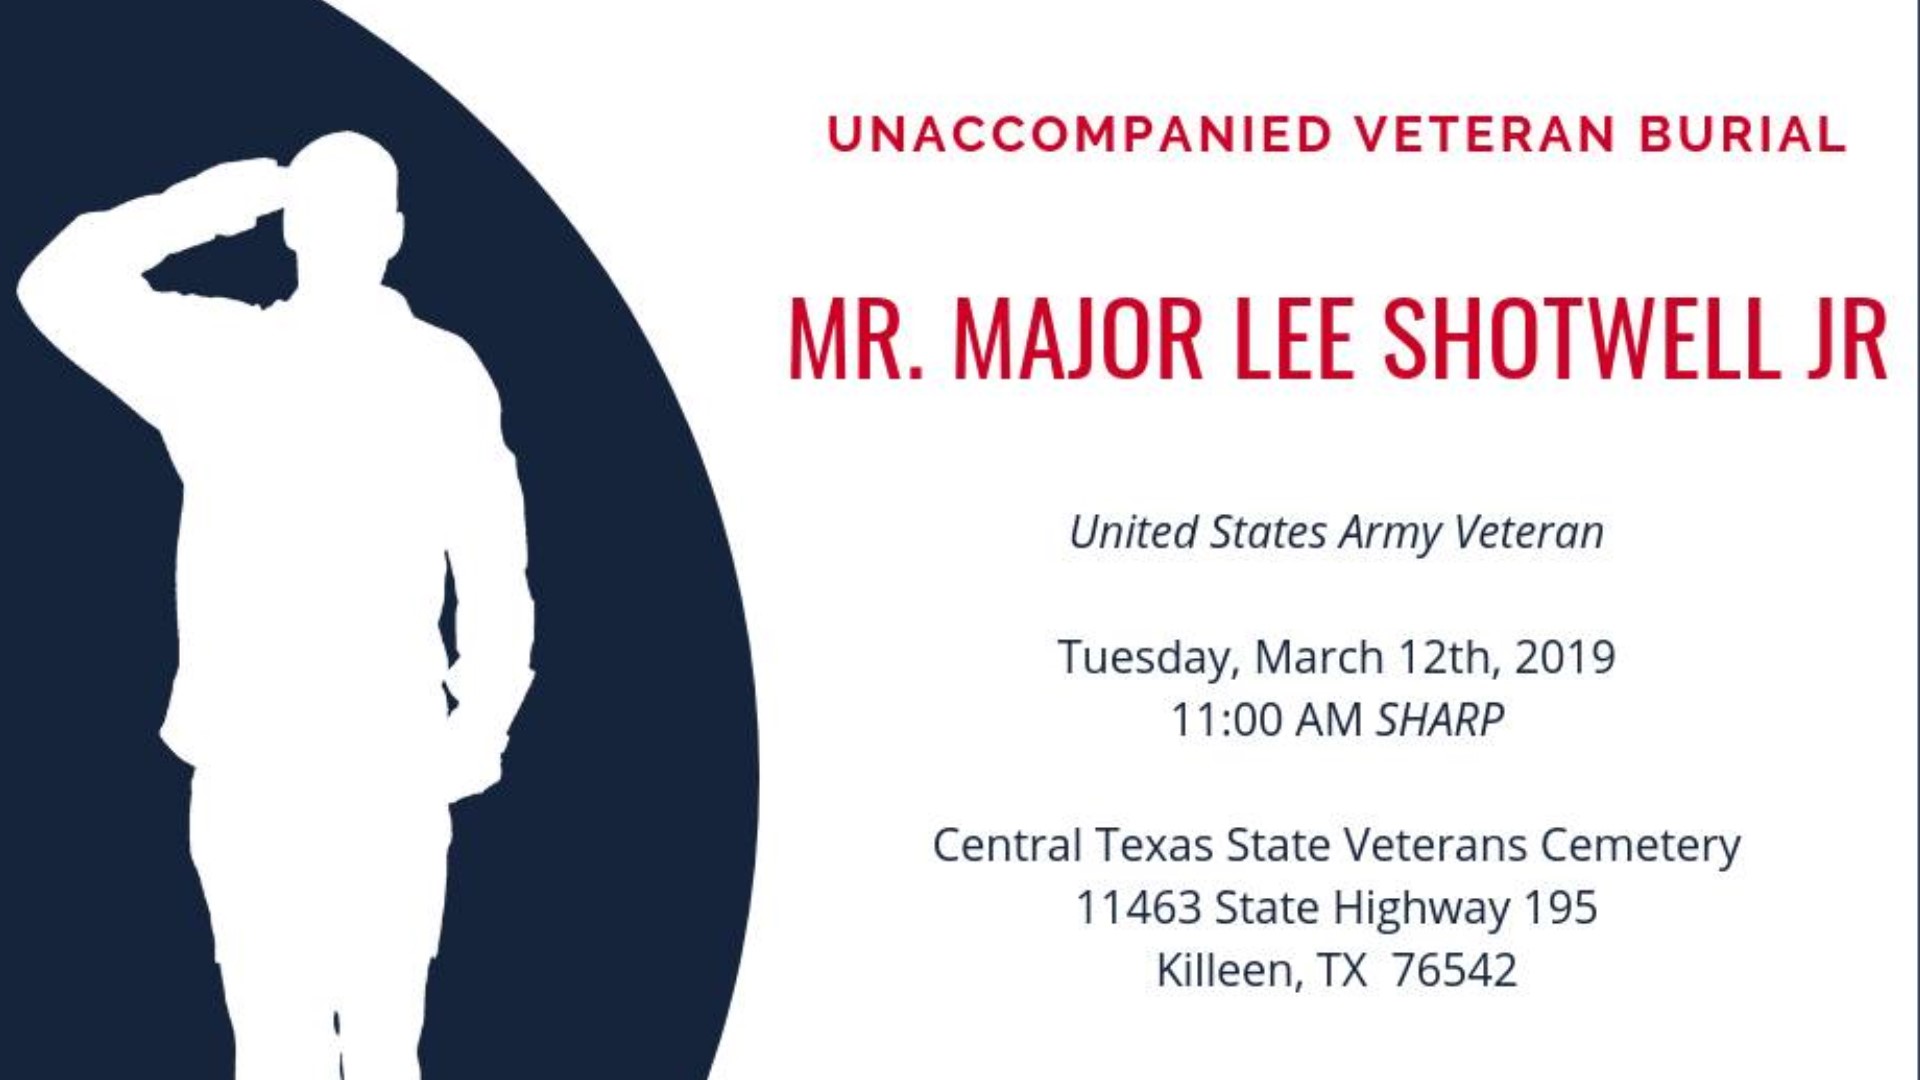 Services for two unaccompanied veterans this week will break the Central Texas State Veterans Cemetery's 100th burial.